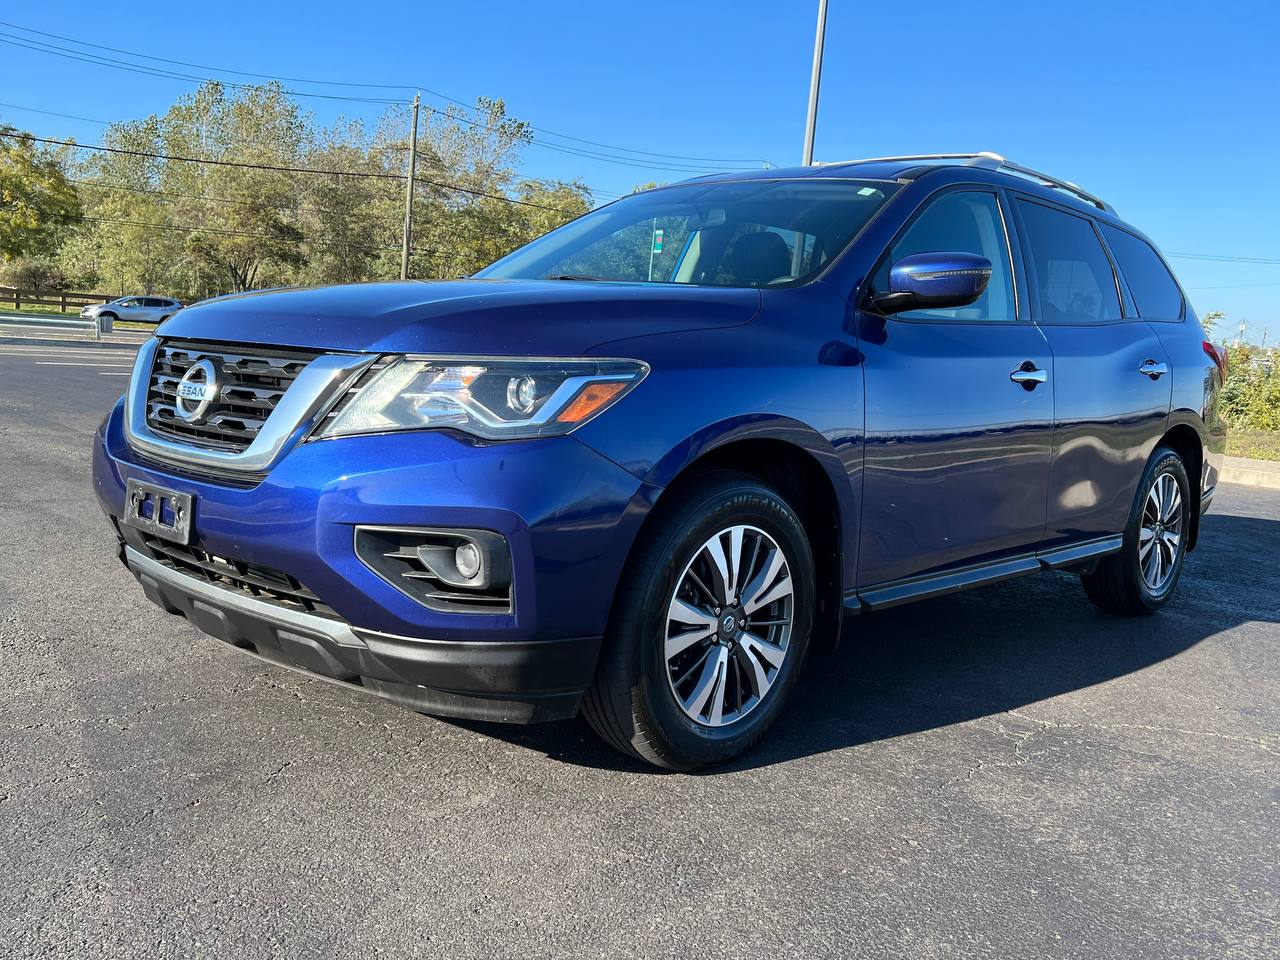 Used Car - 2017 Nissan Pathfinder S 4x4 for Sale in Staten Island, NY